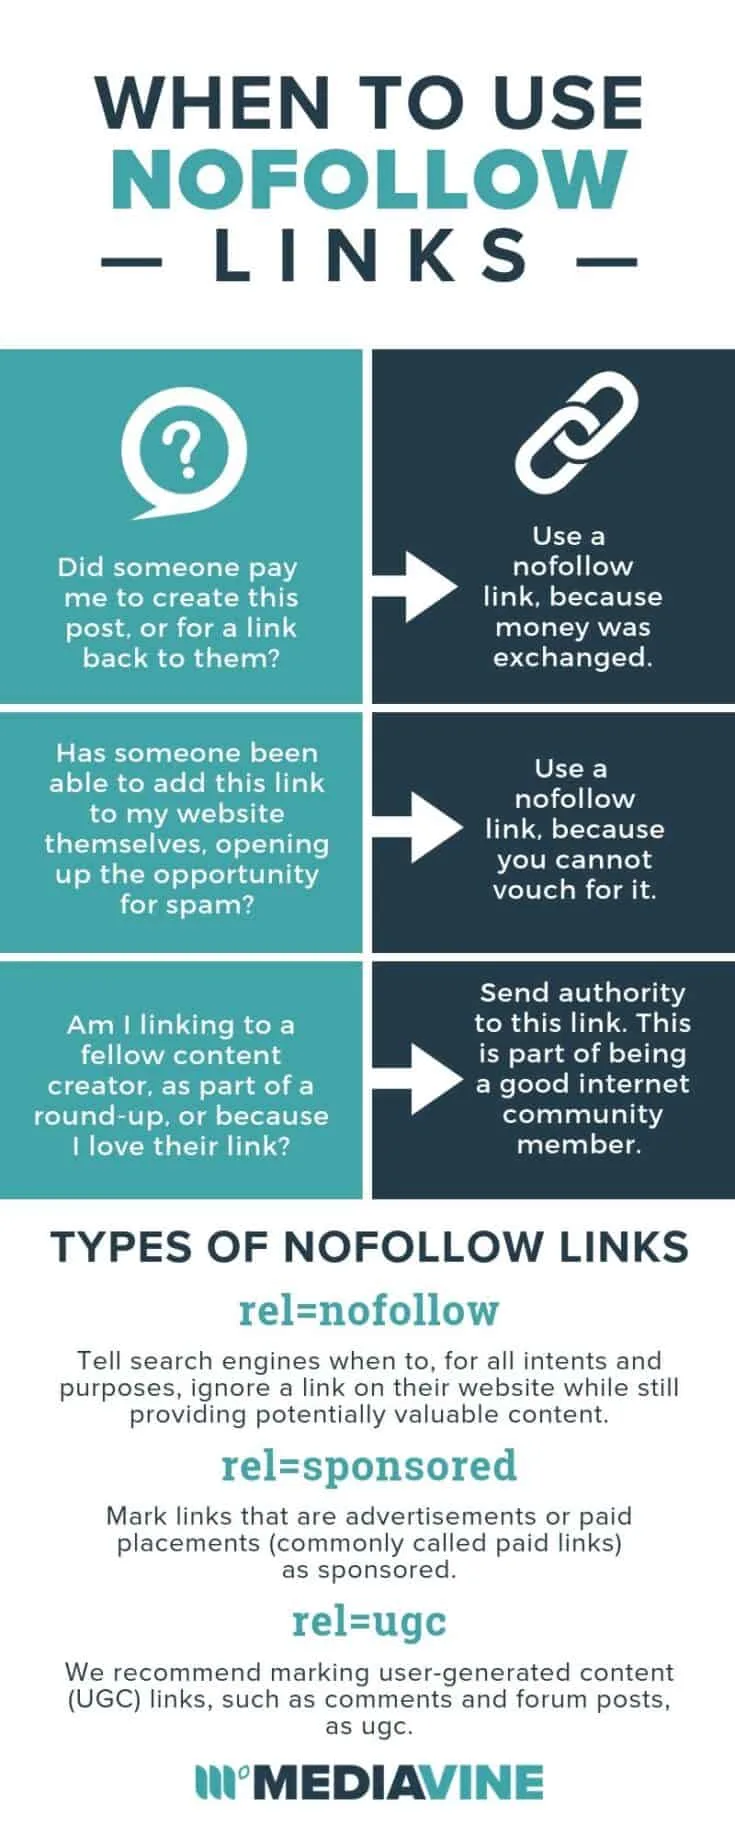 When to use no follow links infographic